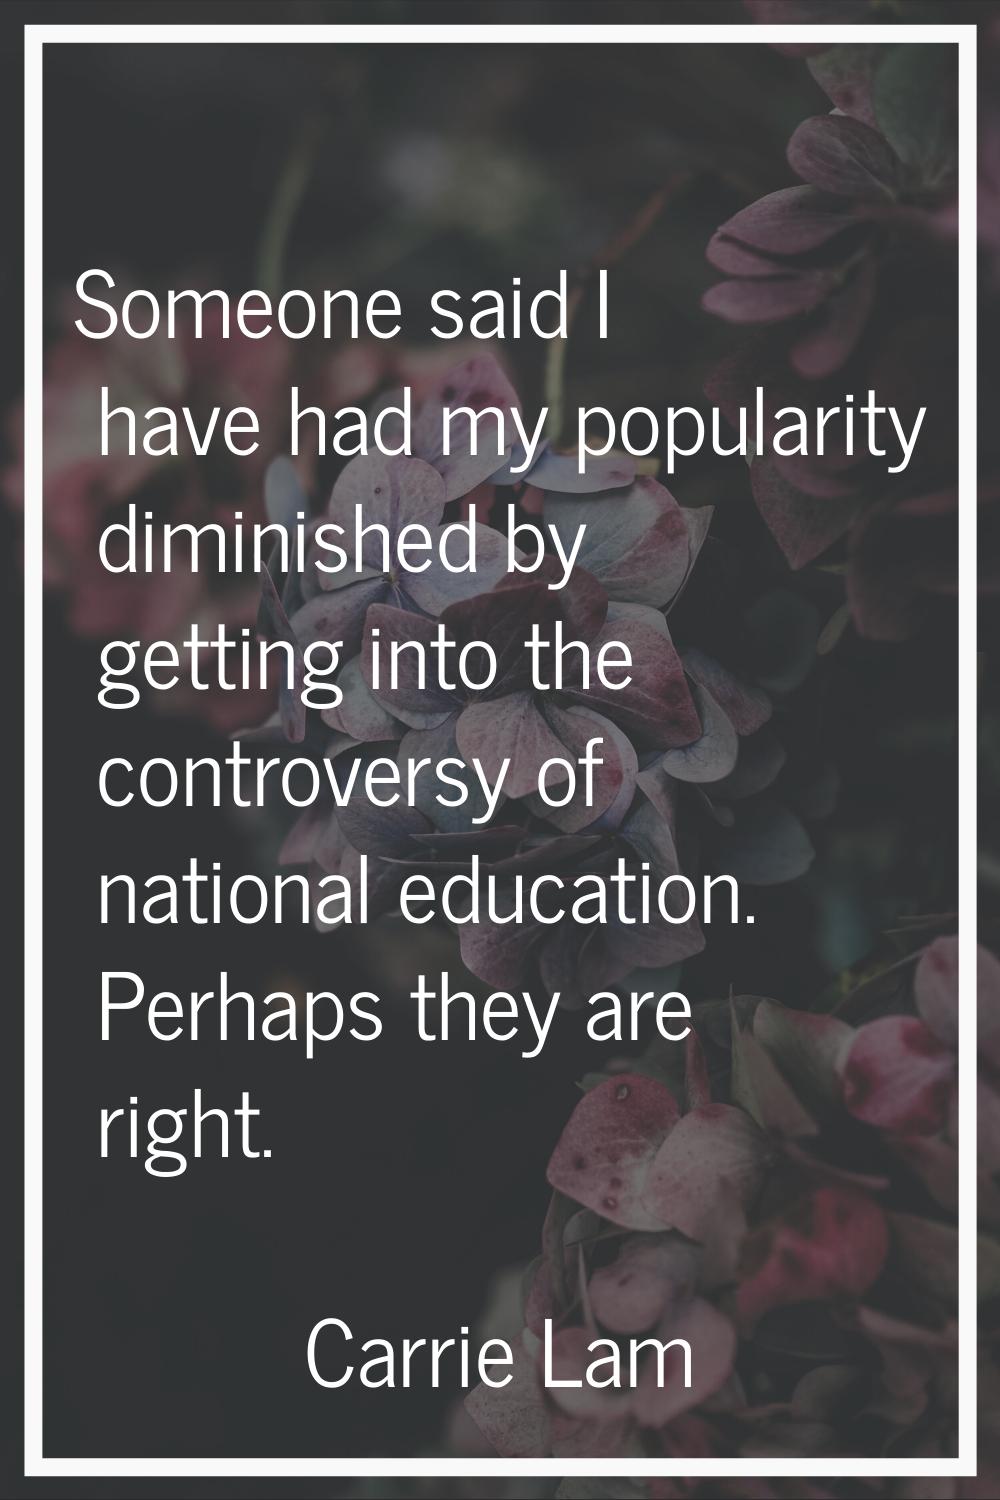 Someone said I have had my popularity diminished by getting into the controversy of national educat